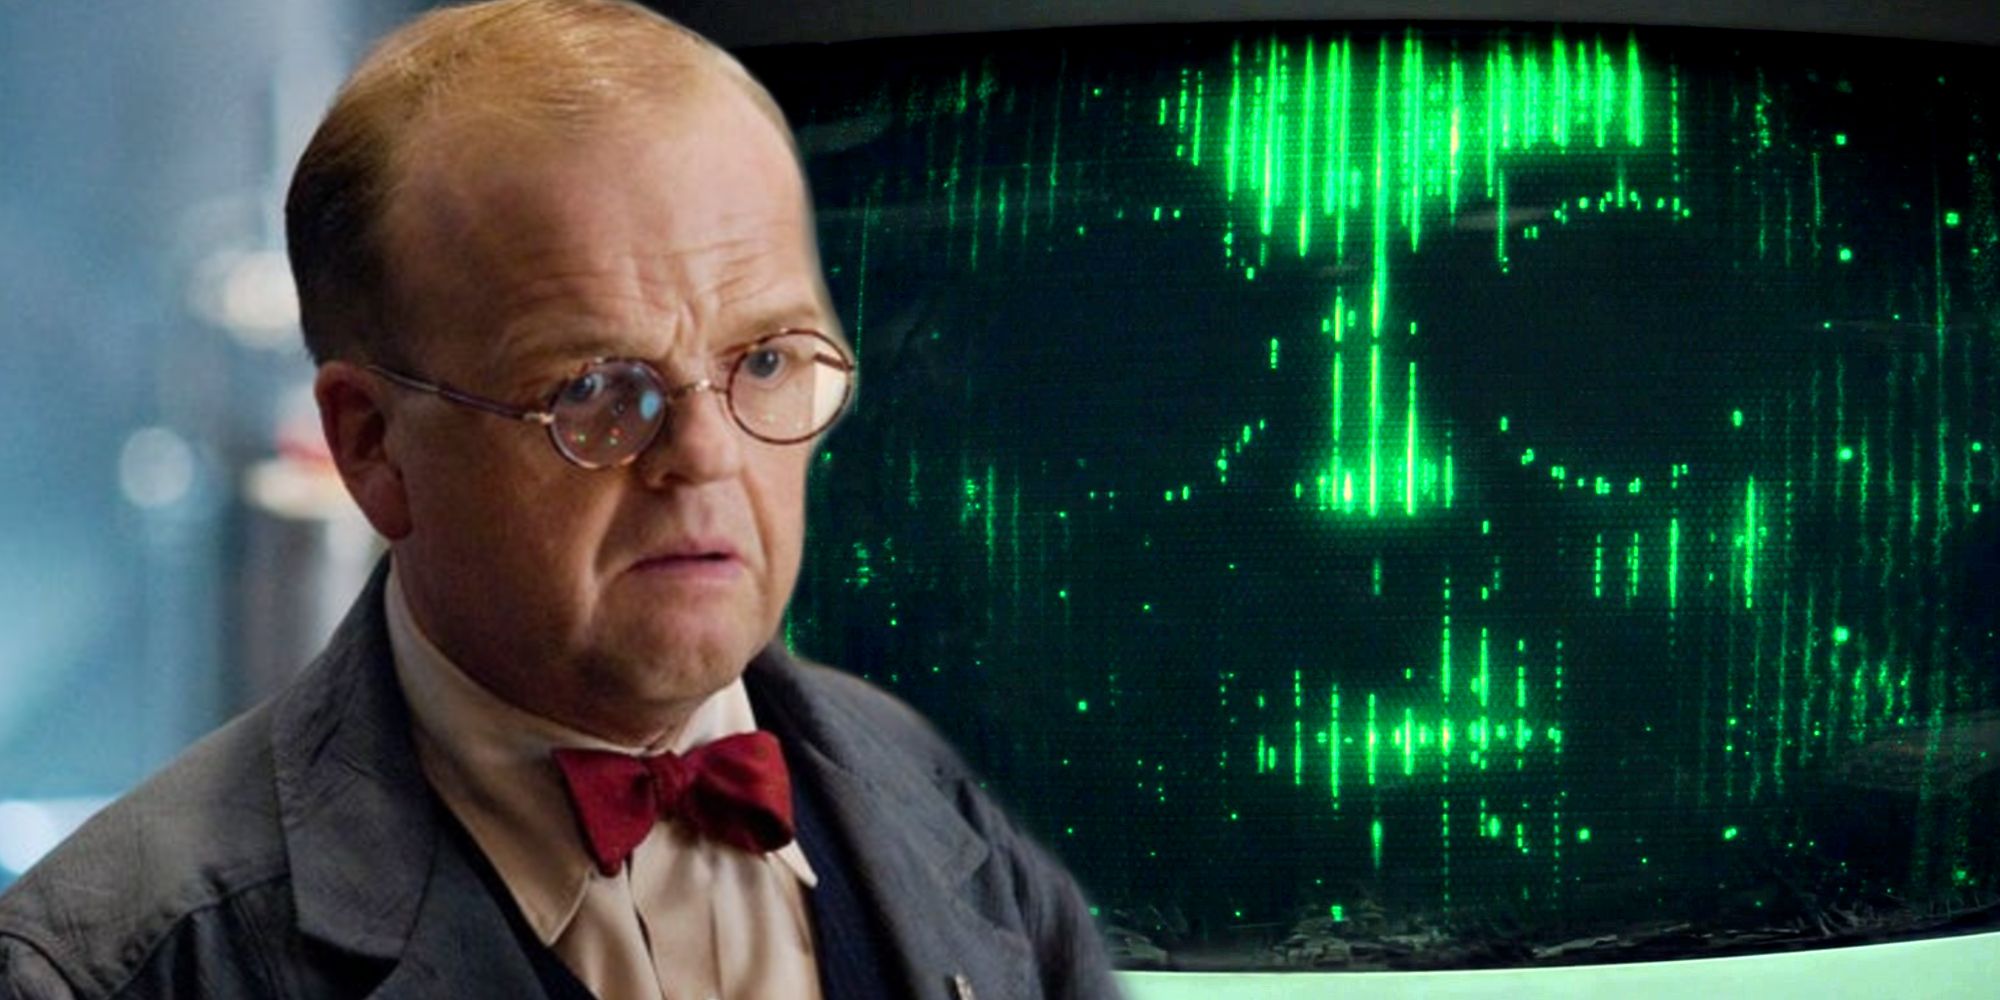 Arnim Zola in Captain America The First Avenger and the Winter Soldier